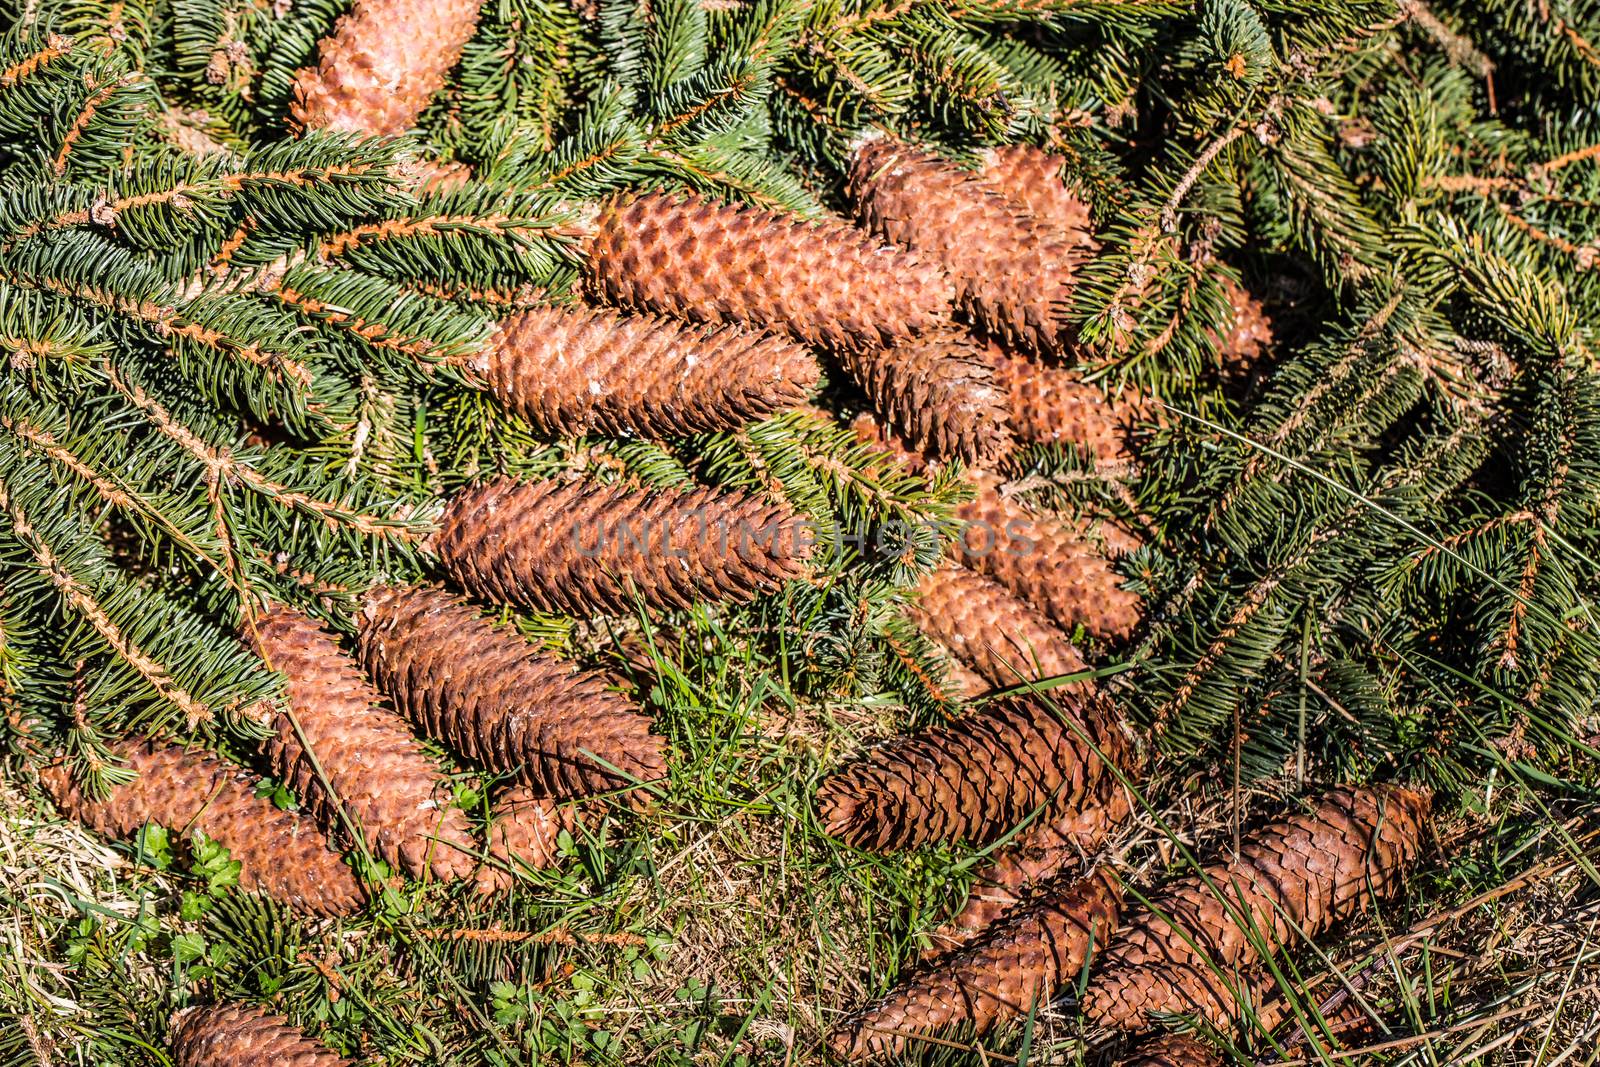 Pine branches with cones on the forest floor